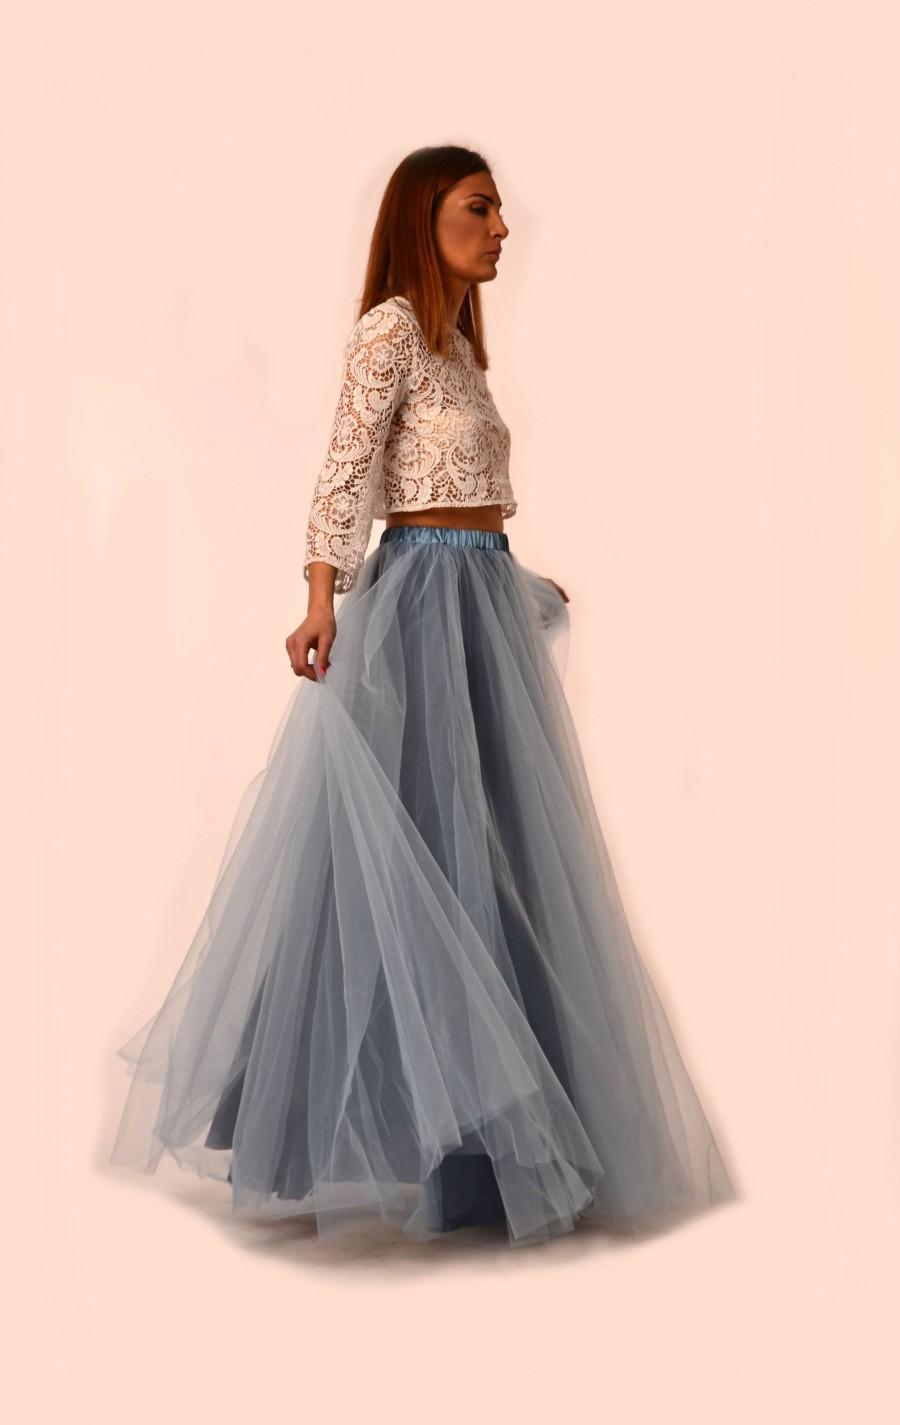 Wedding - Dusty Blue Tulle Skirt/ Maxi Tulle Skirt/ Made To Measure Long Bridesmaids Tulle Skirt/ Bridal/ Prom/Party Tulle